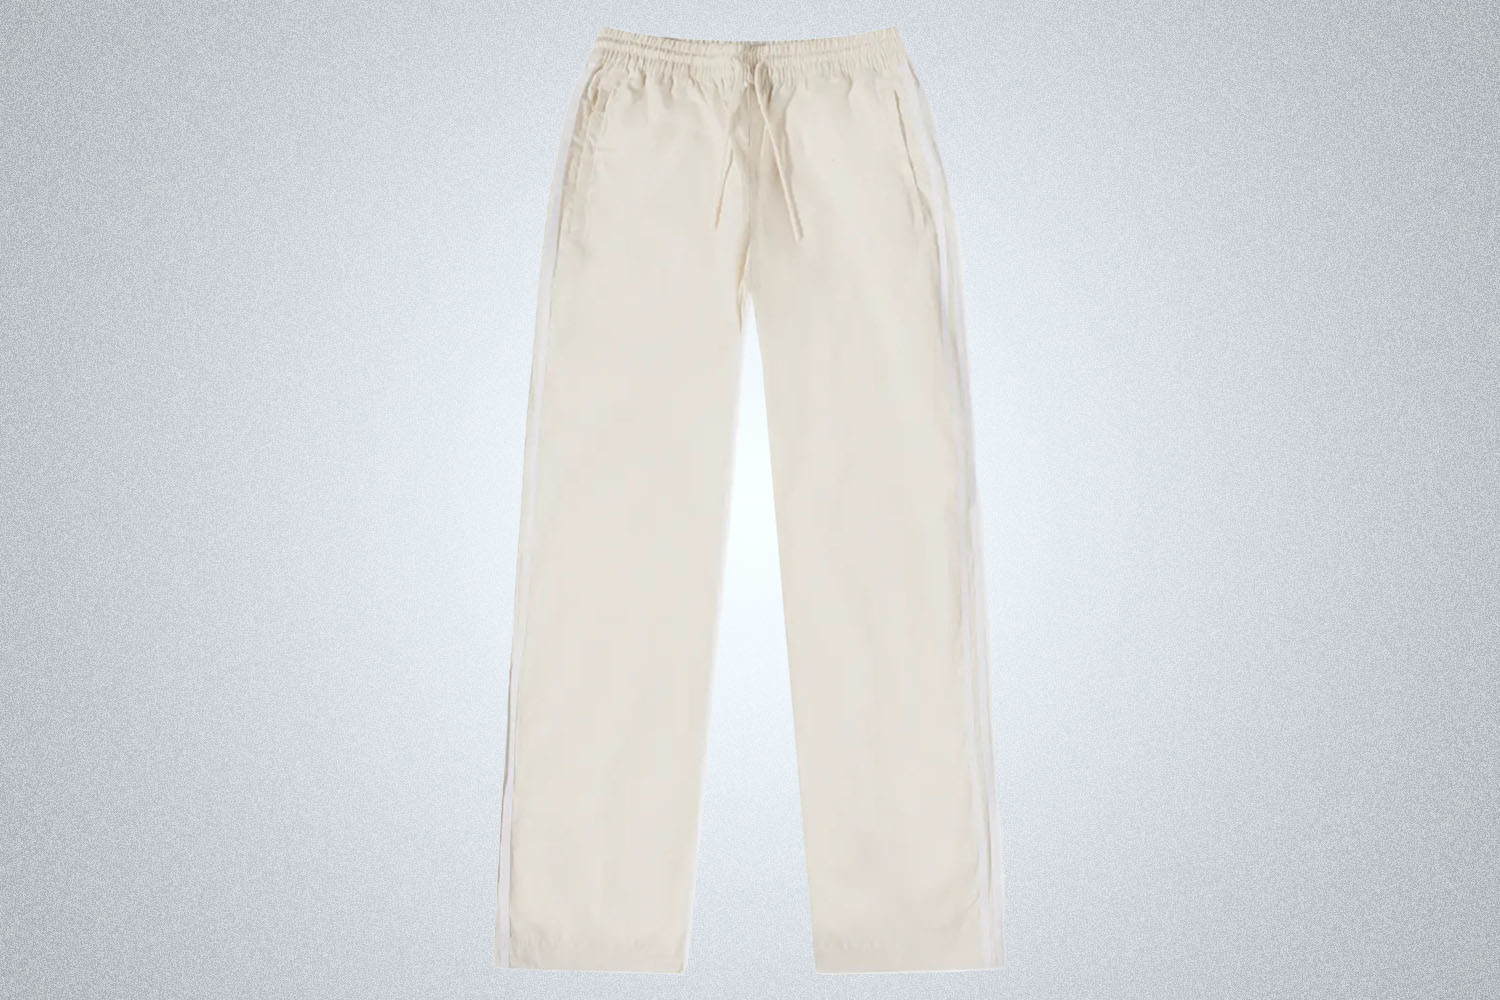 Adidas Summer Skate Relaxed Work Pants